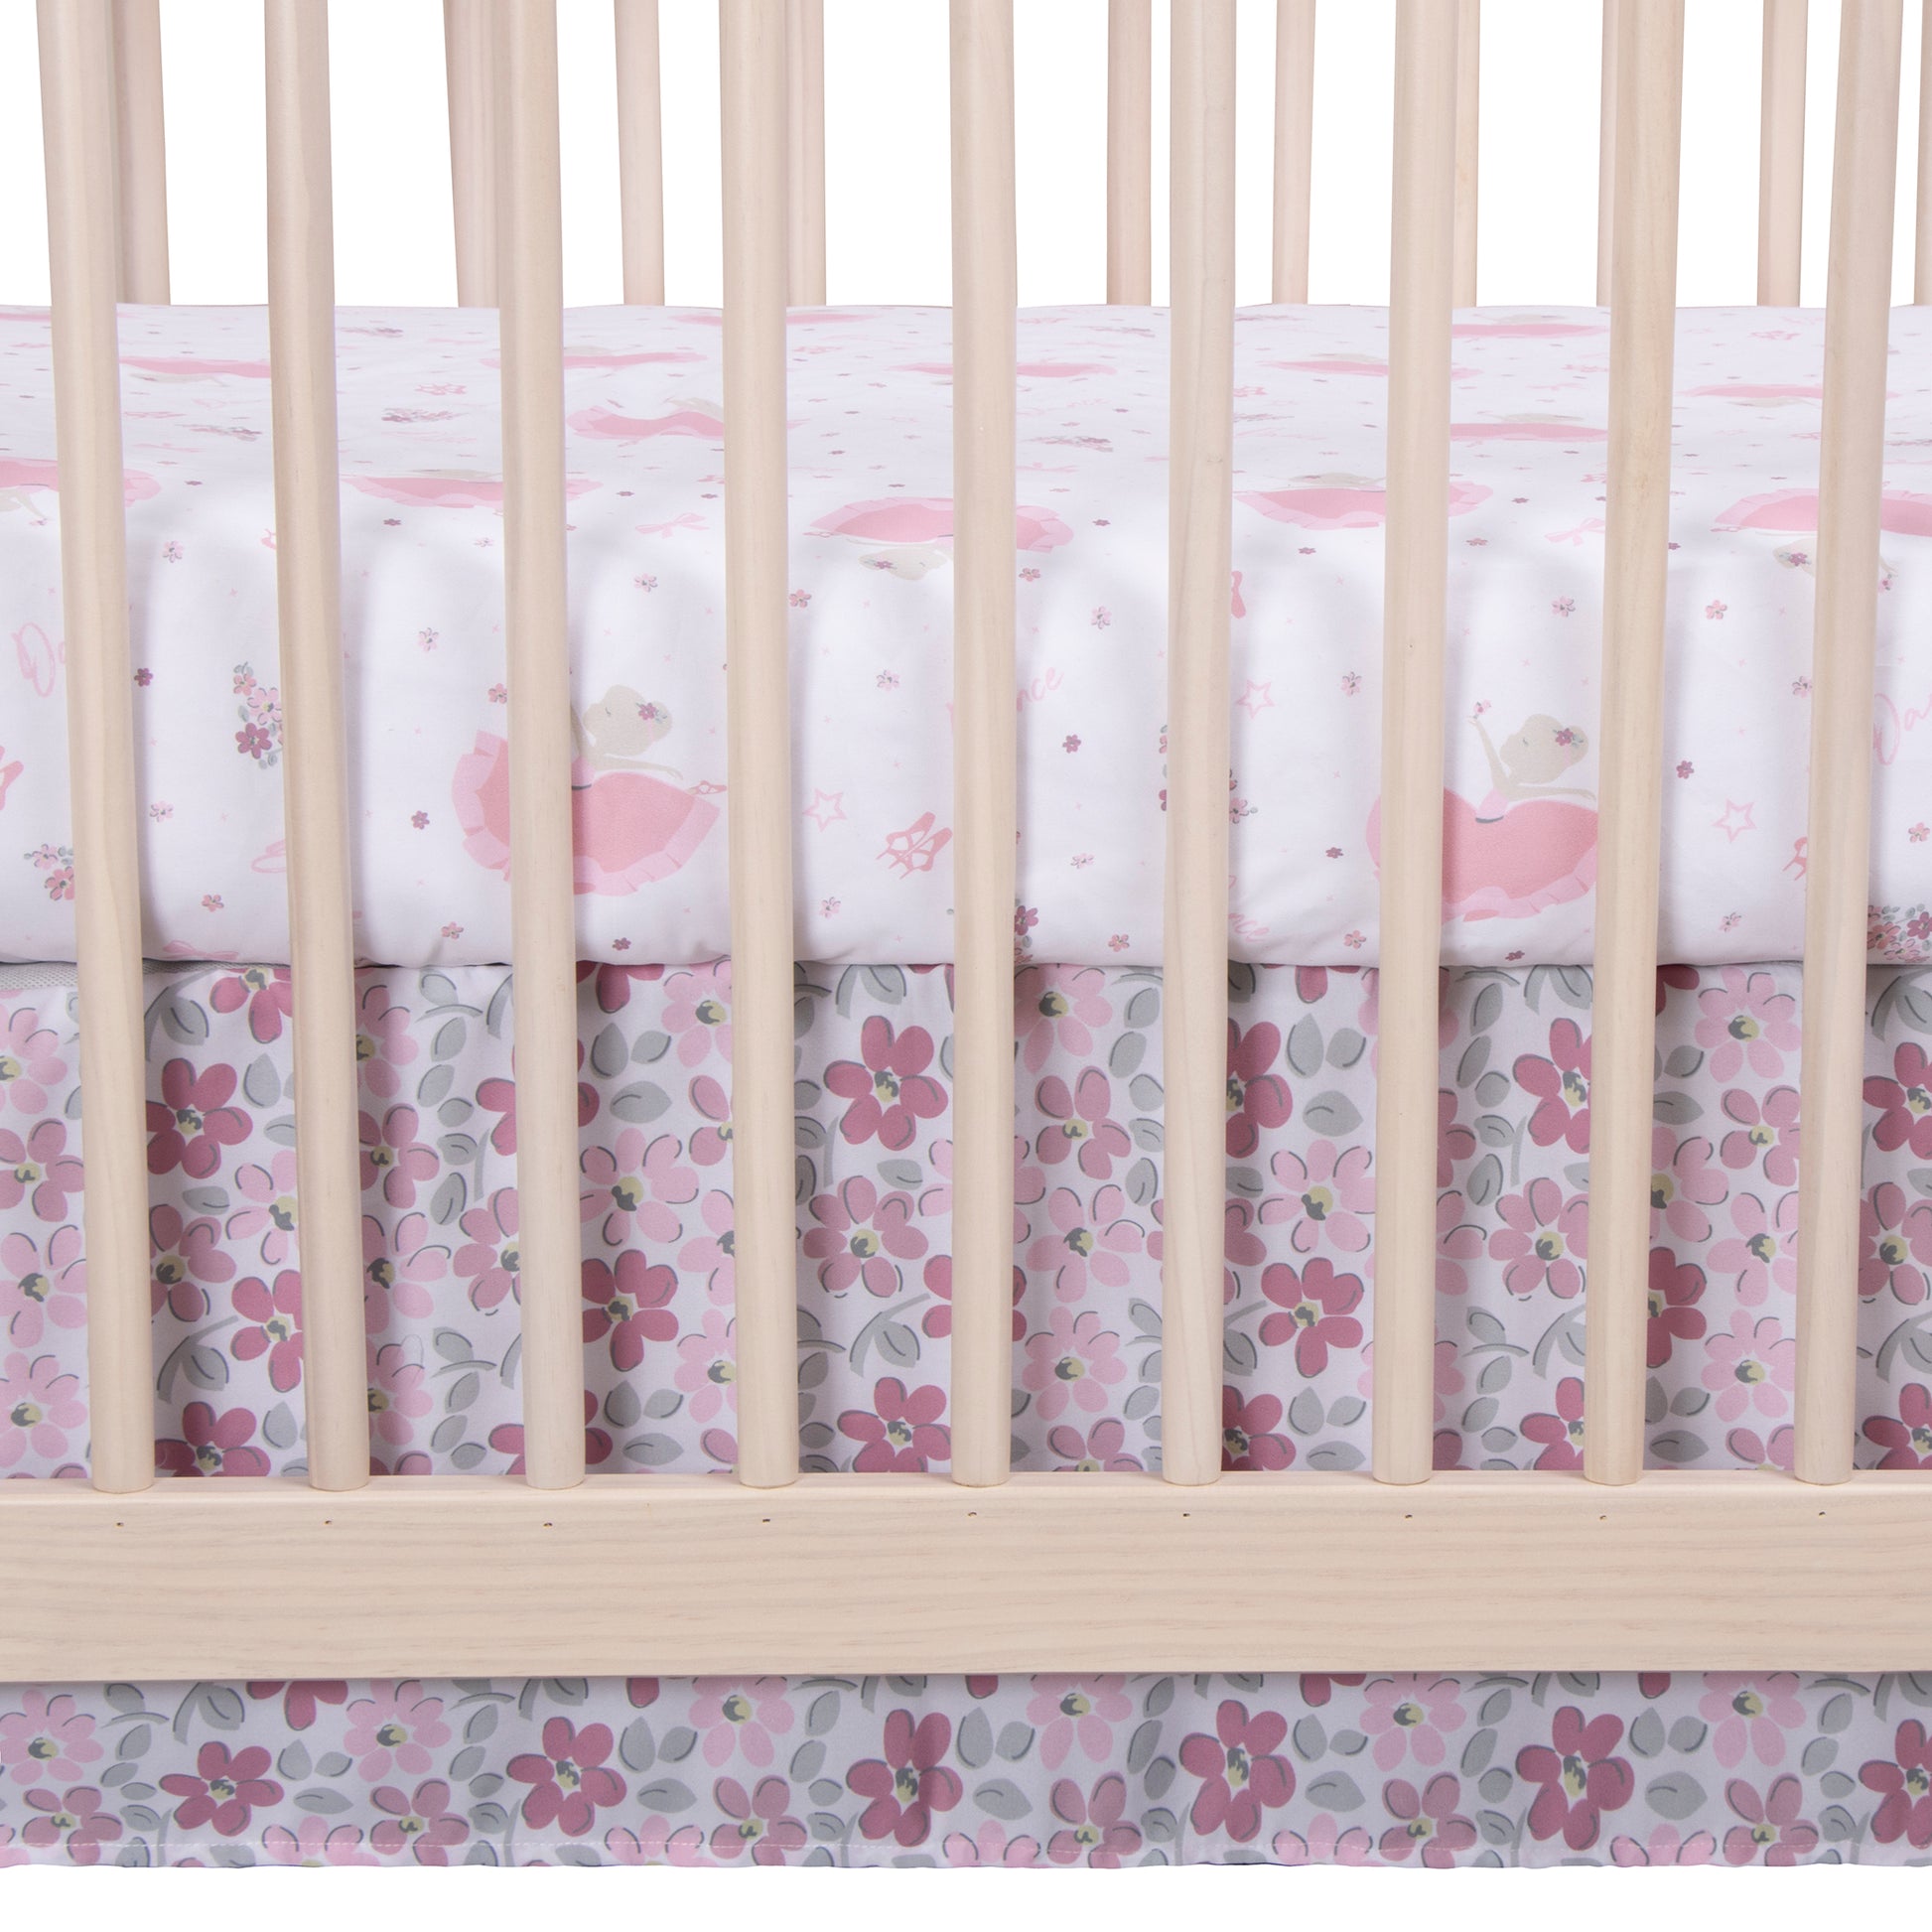  Blooming Ballet 4 Piece Crib Bedding Set - features crib sheet and crib skirt by Sammy and Lou